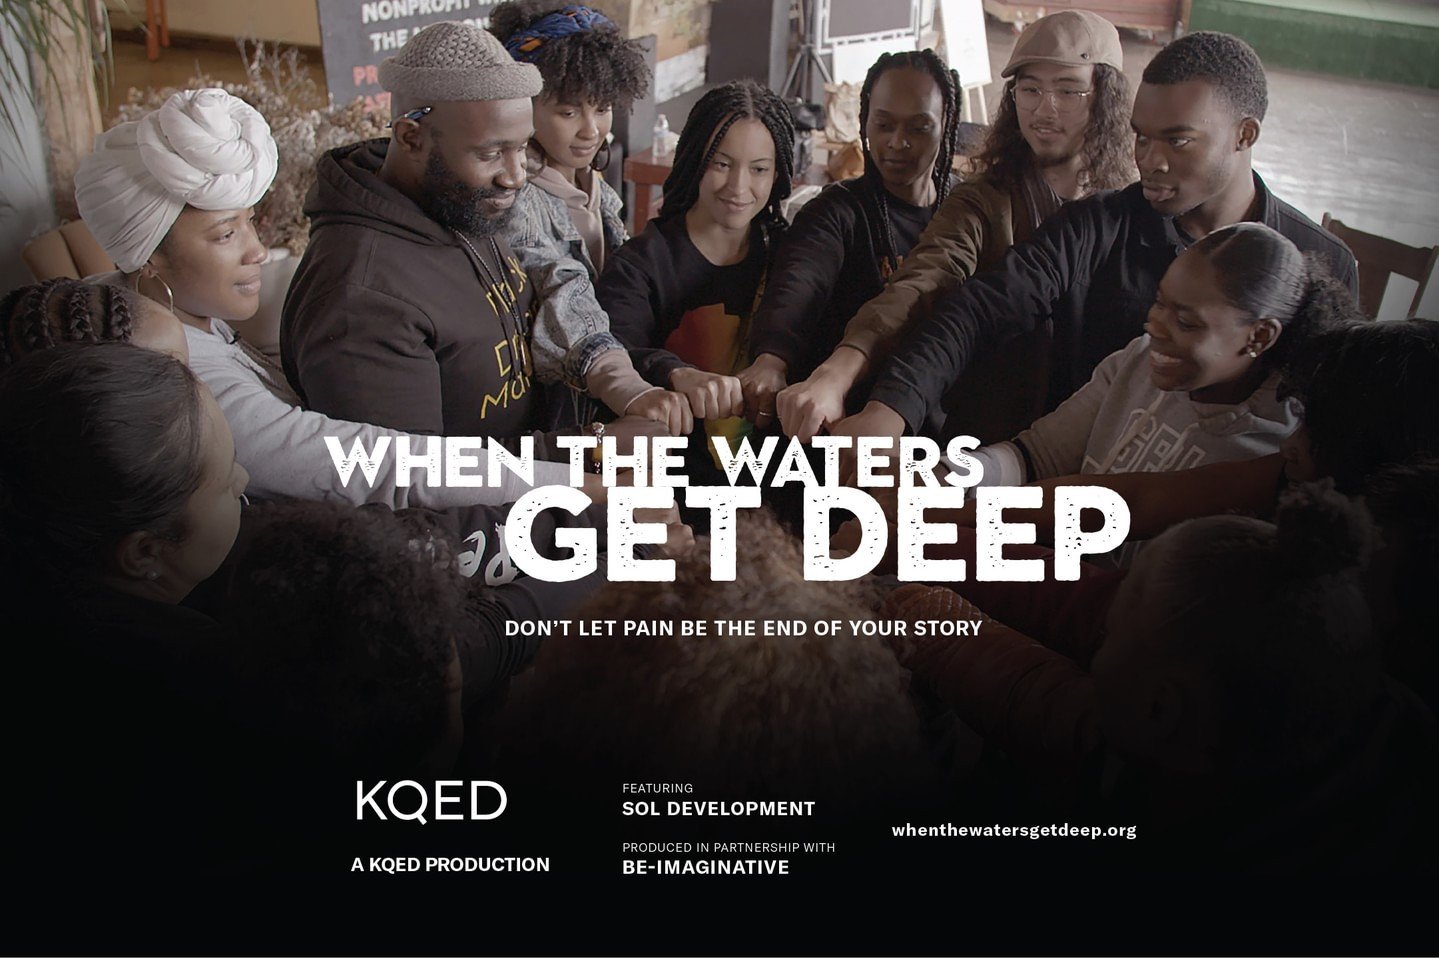 &quot;When the Waters Get Deep&quot;: Emmy Nominated! Ya know, when spirit move, it move. Just like that. Thank you to the Most High. Thank you to the ancestors that hold us. Thank you to this village that heals us. We tapped in and it&rsquo;s real a